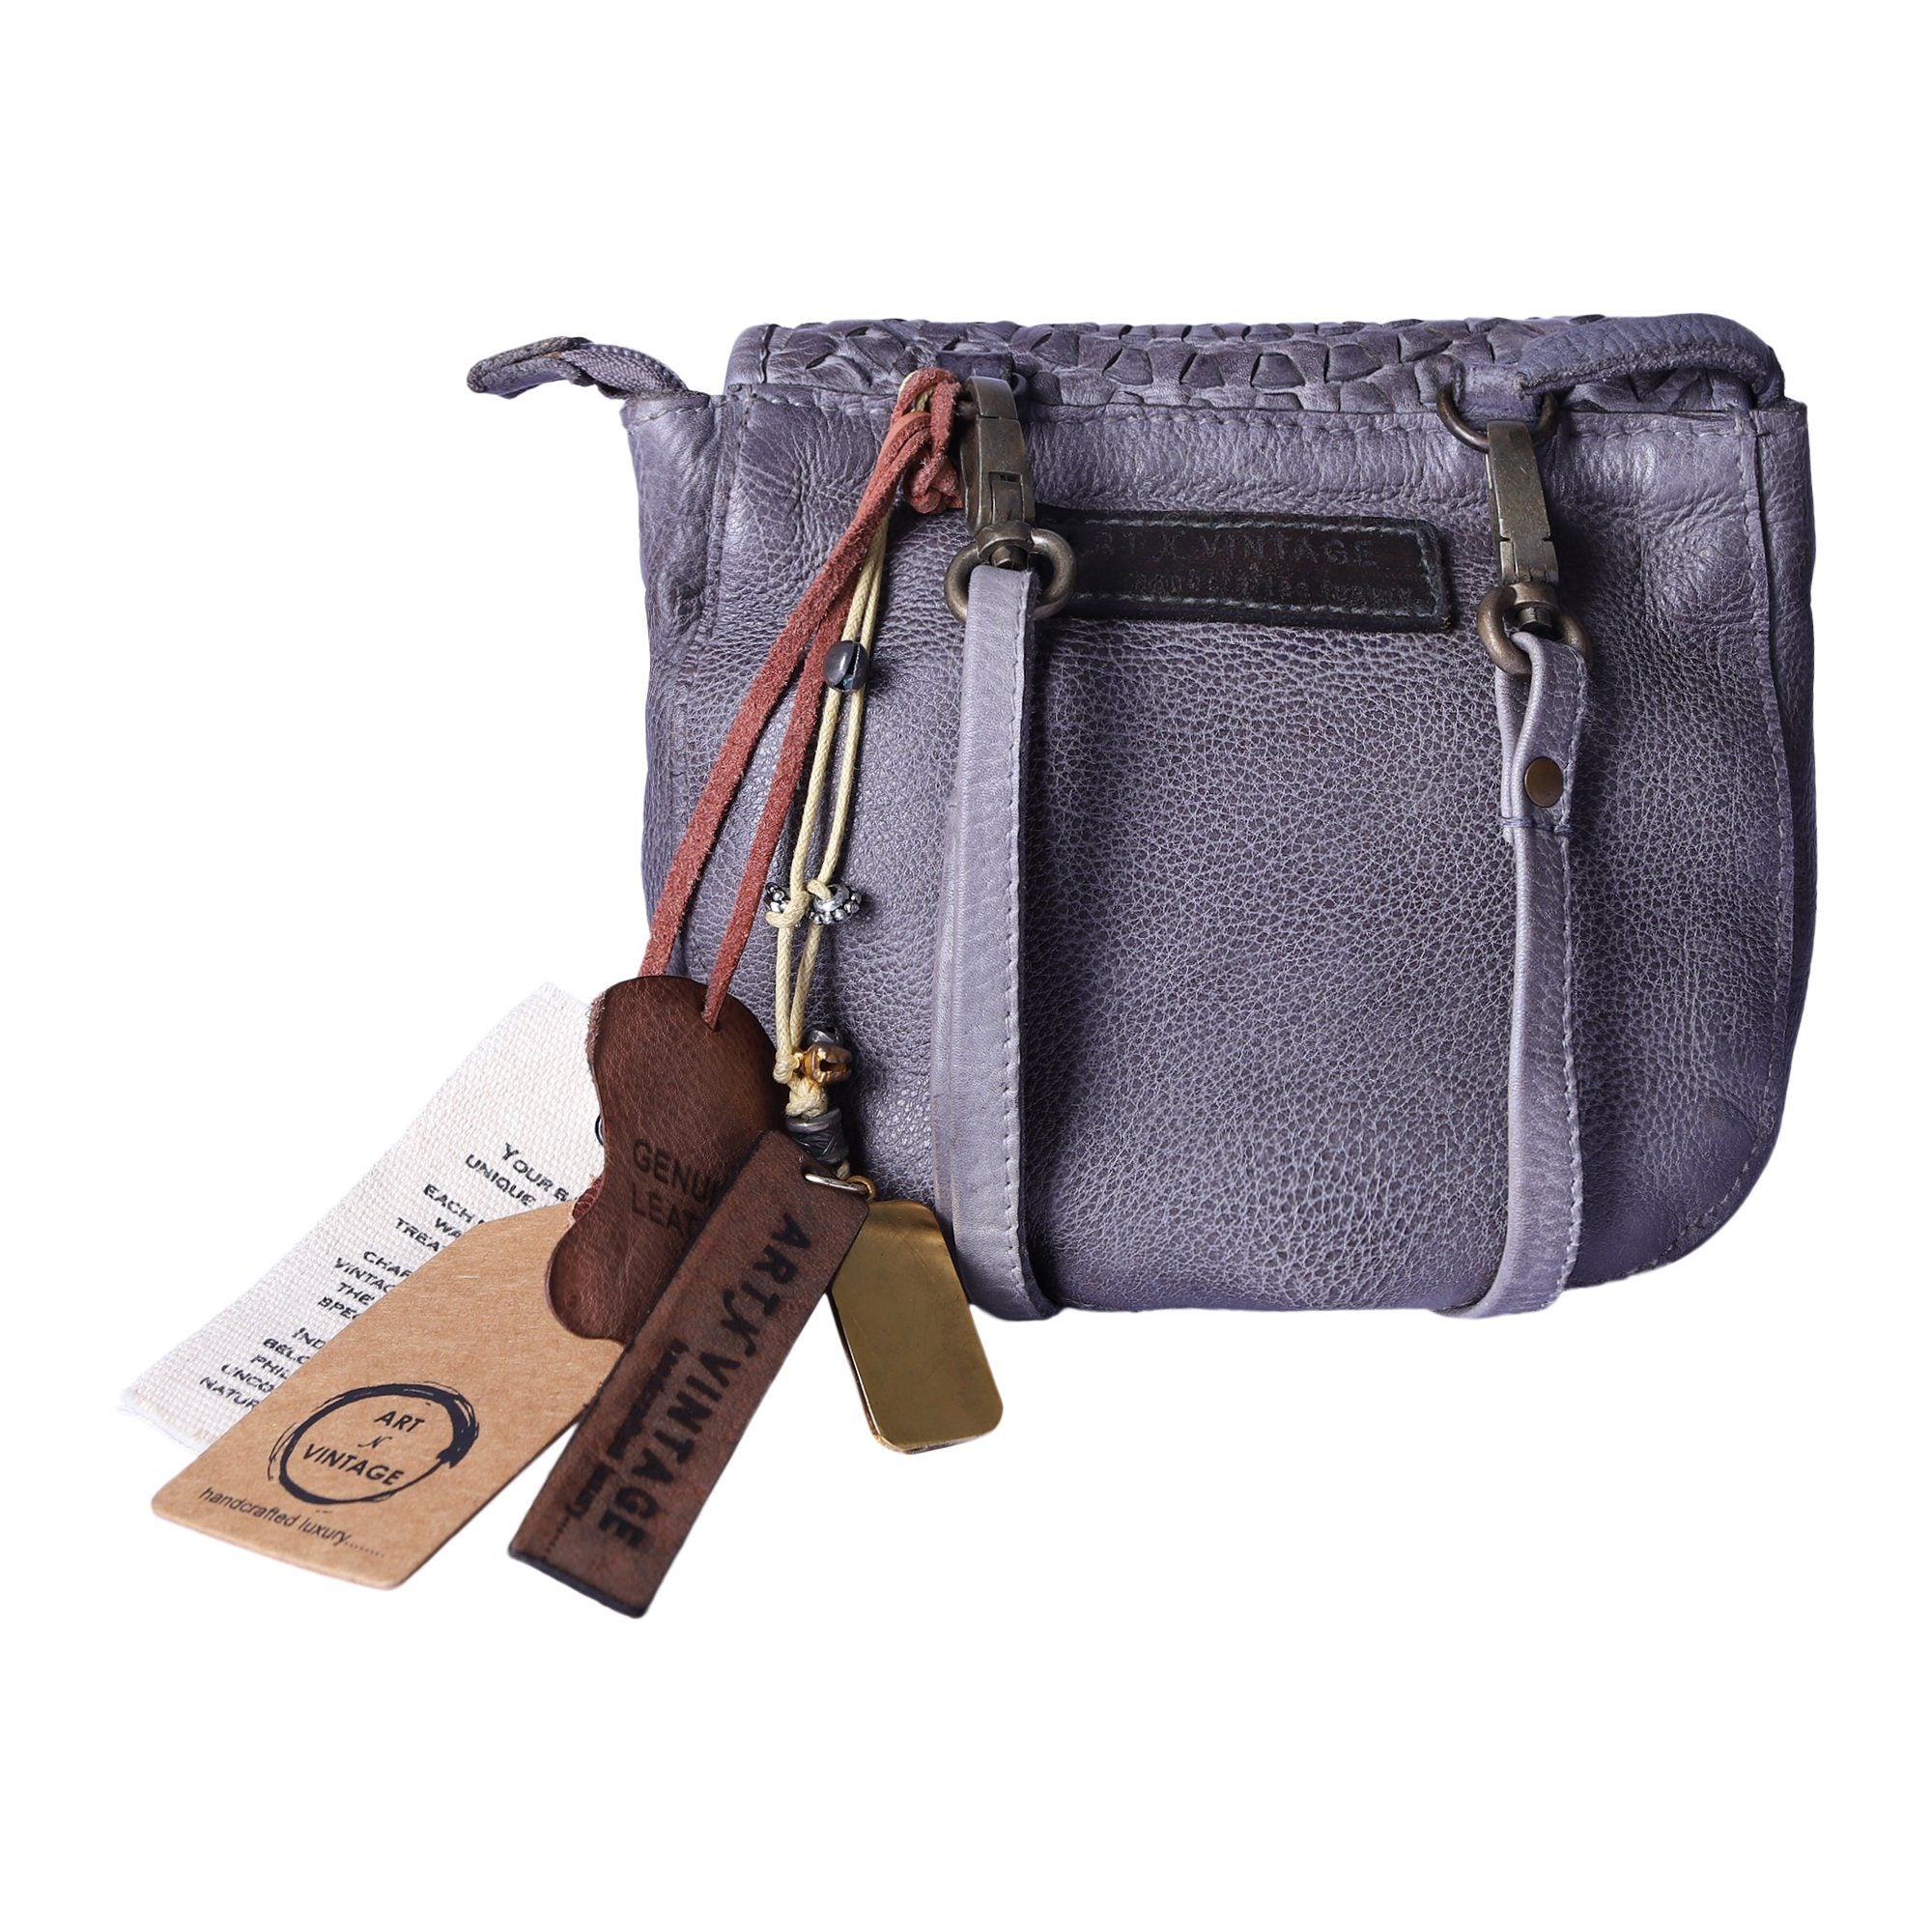 Mudra Designer Bag: Small crossbody sling in grey leather with woven mandala and stud by Art N Vintage